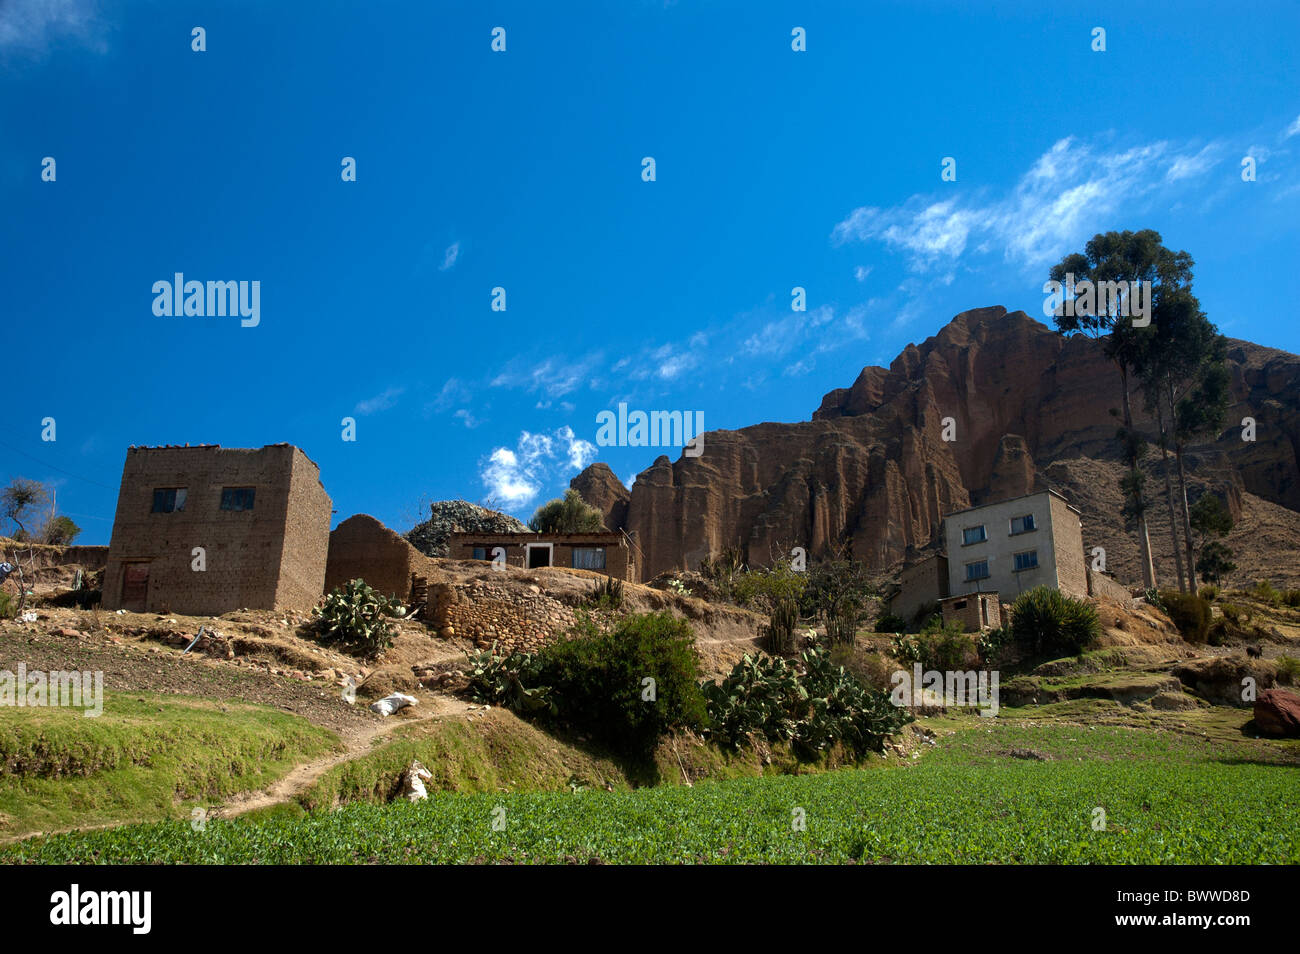 A lonely house under the high rock walls of Palca Canyon, La Paz, Bolivia. Stock Photo